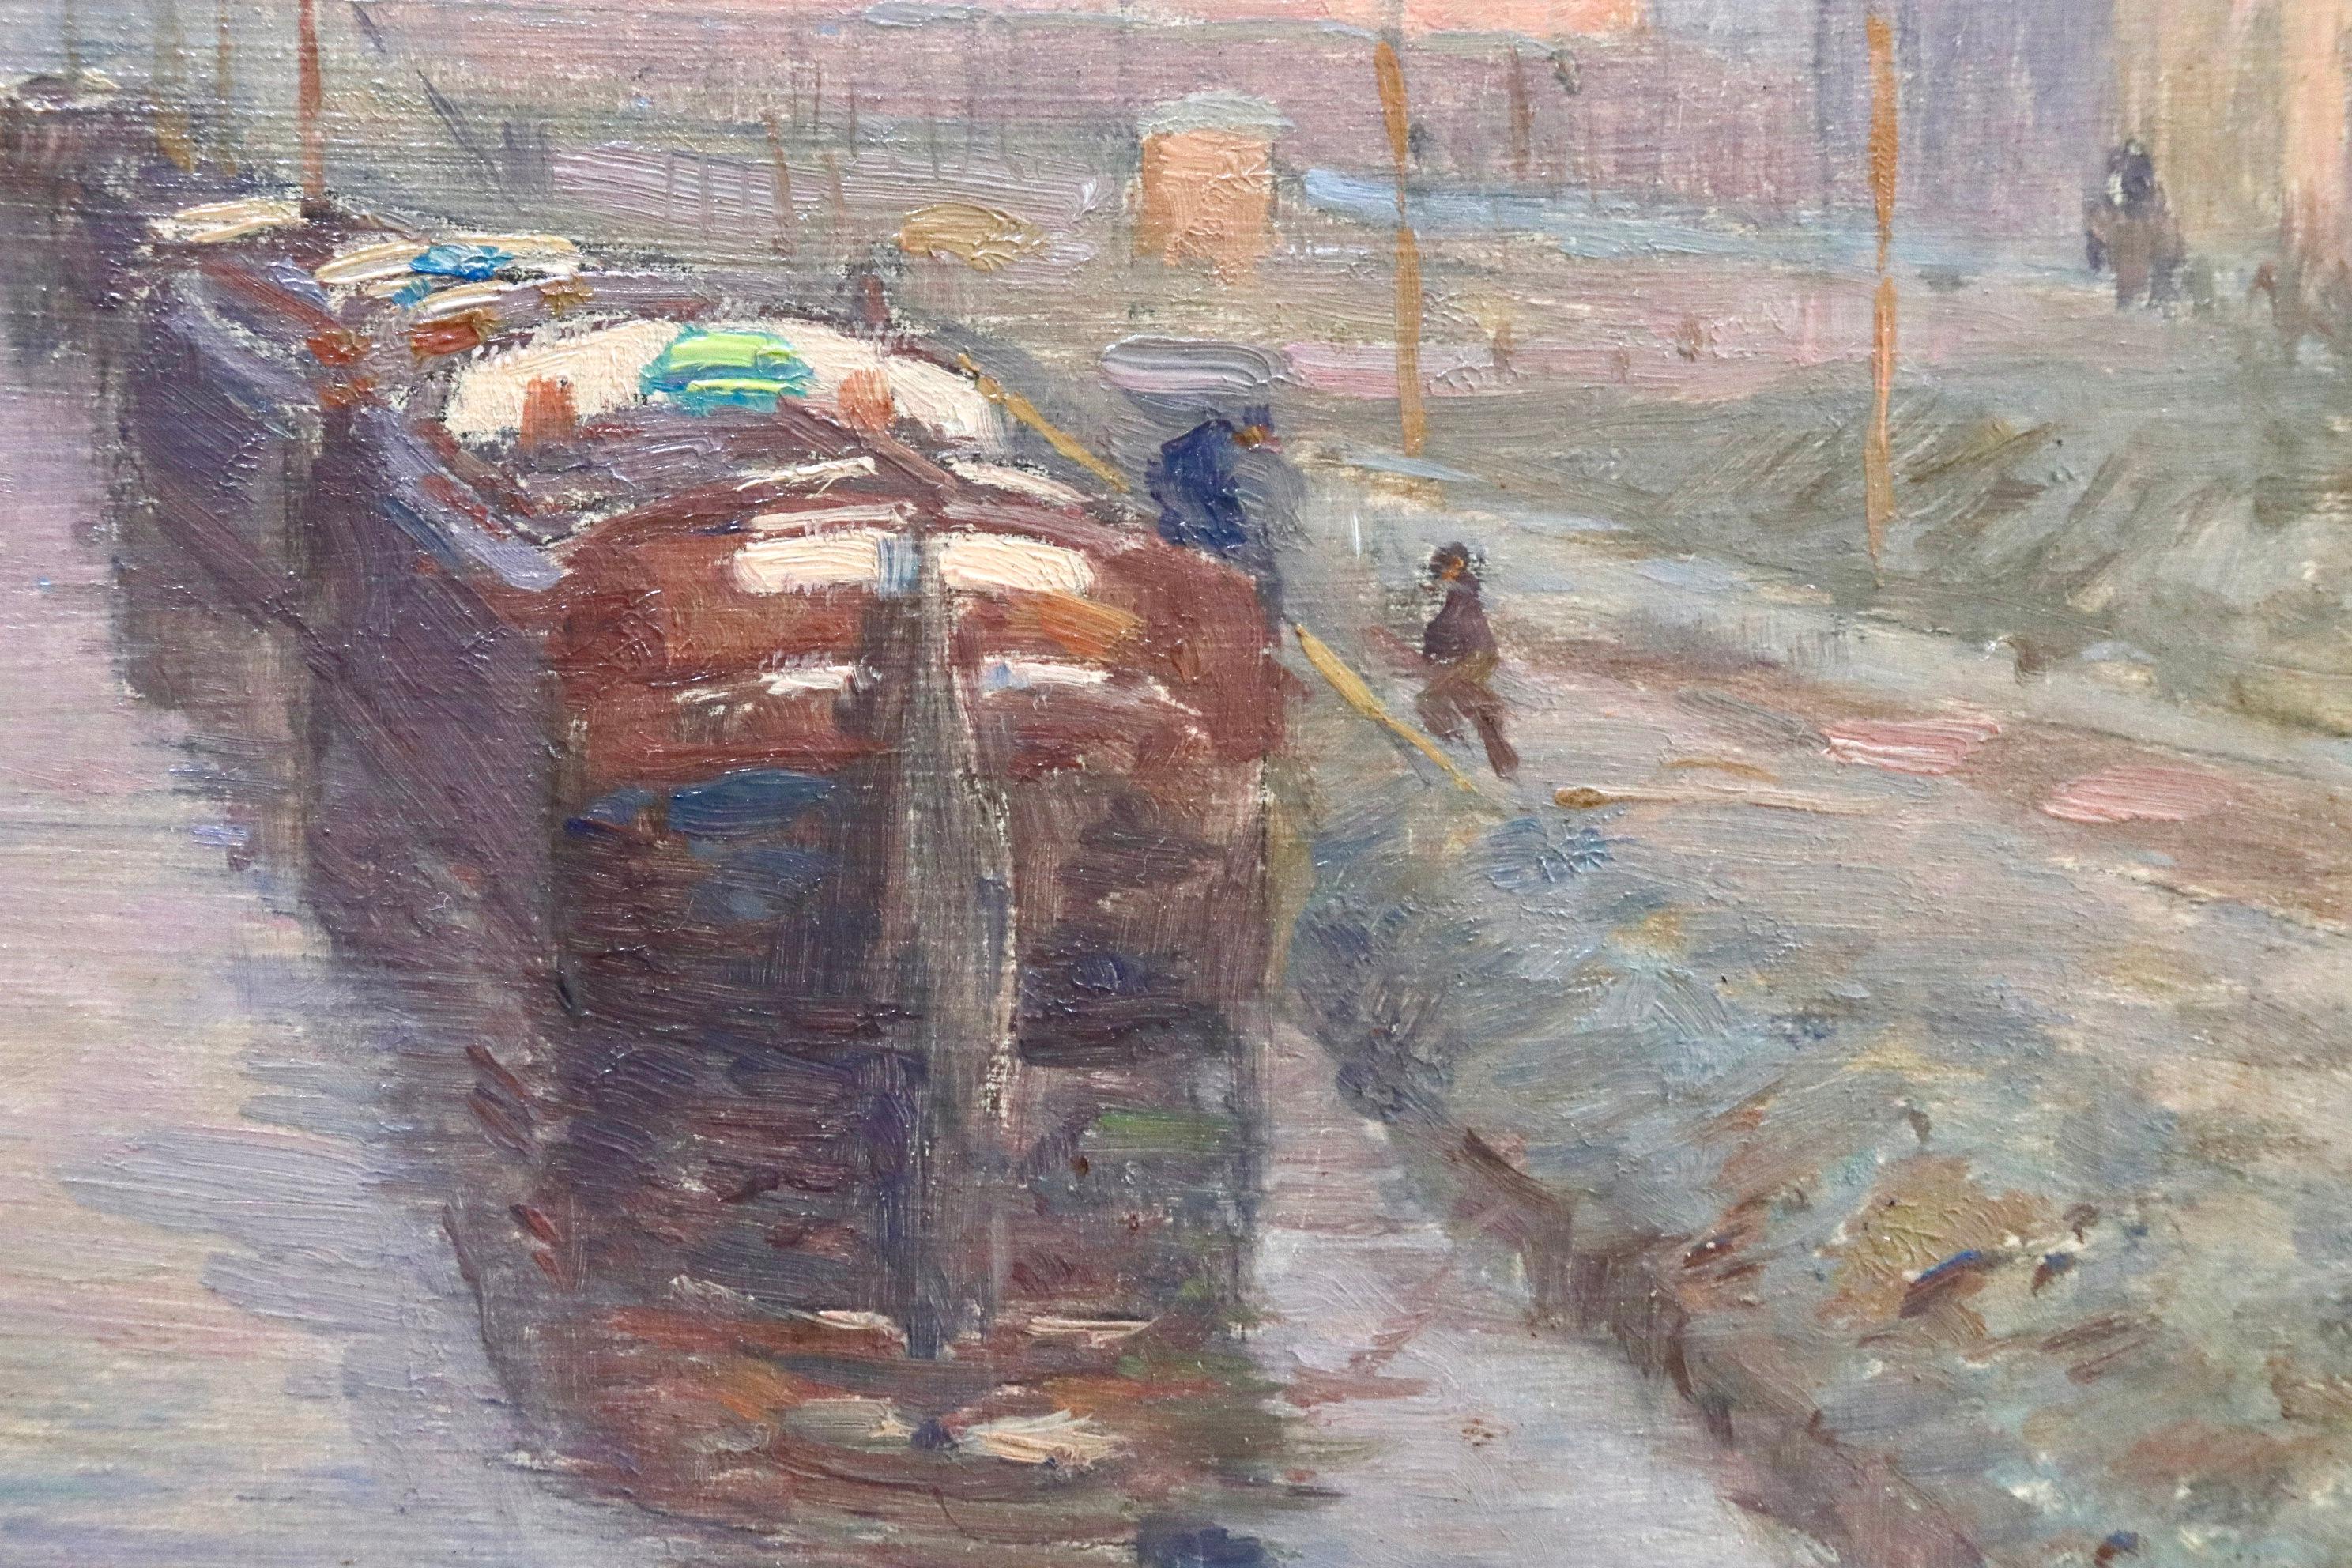 A lovely oil on panel by Henri Duhem depicting barges on the canal in Douai - the colouring beautifully represents the cold of winter. Signed lower left and dated 1903 verso. This painting is not currently framed but a suitable frame can be sourced